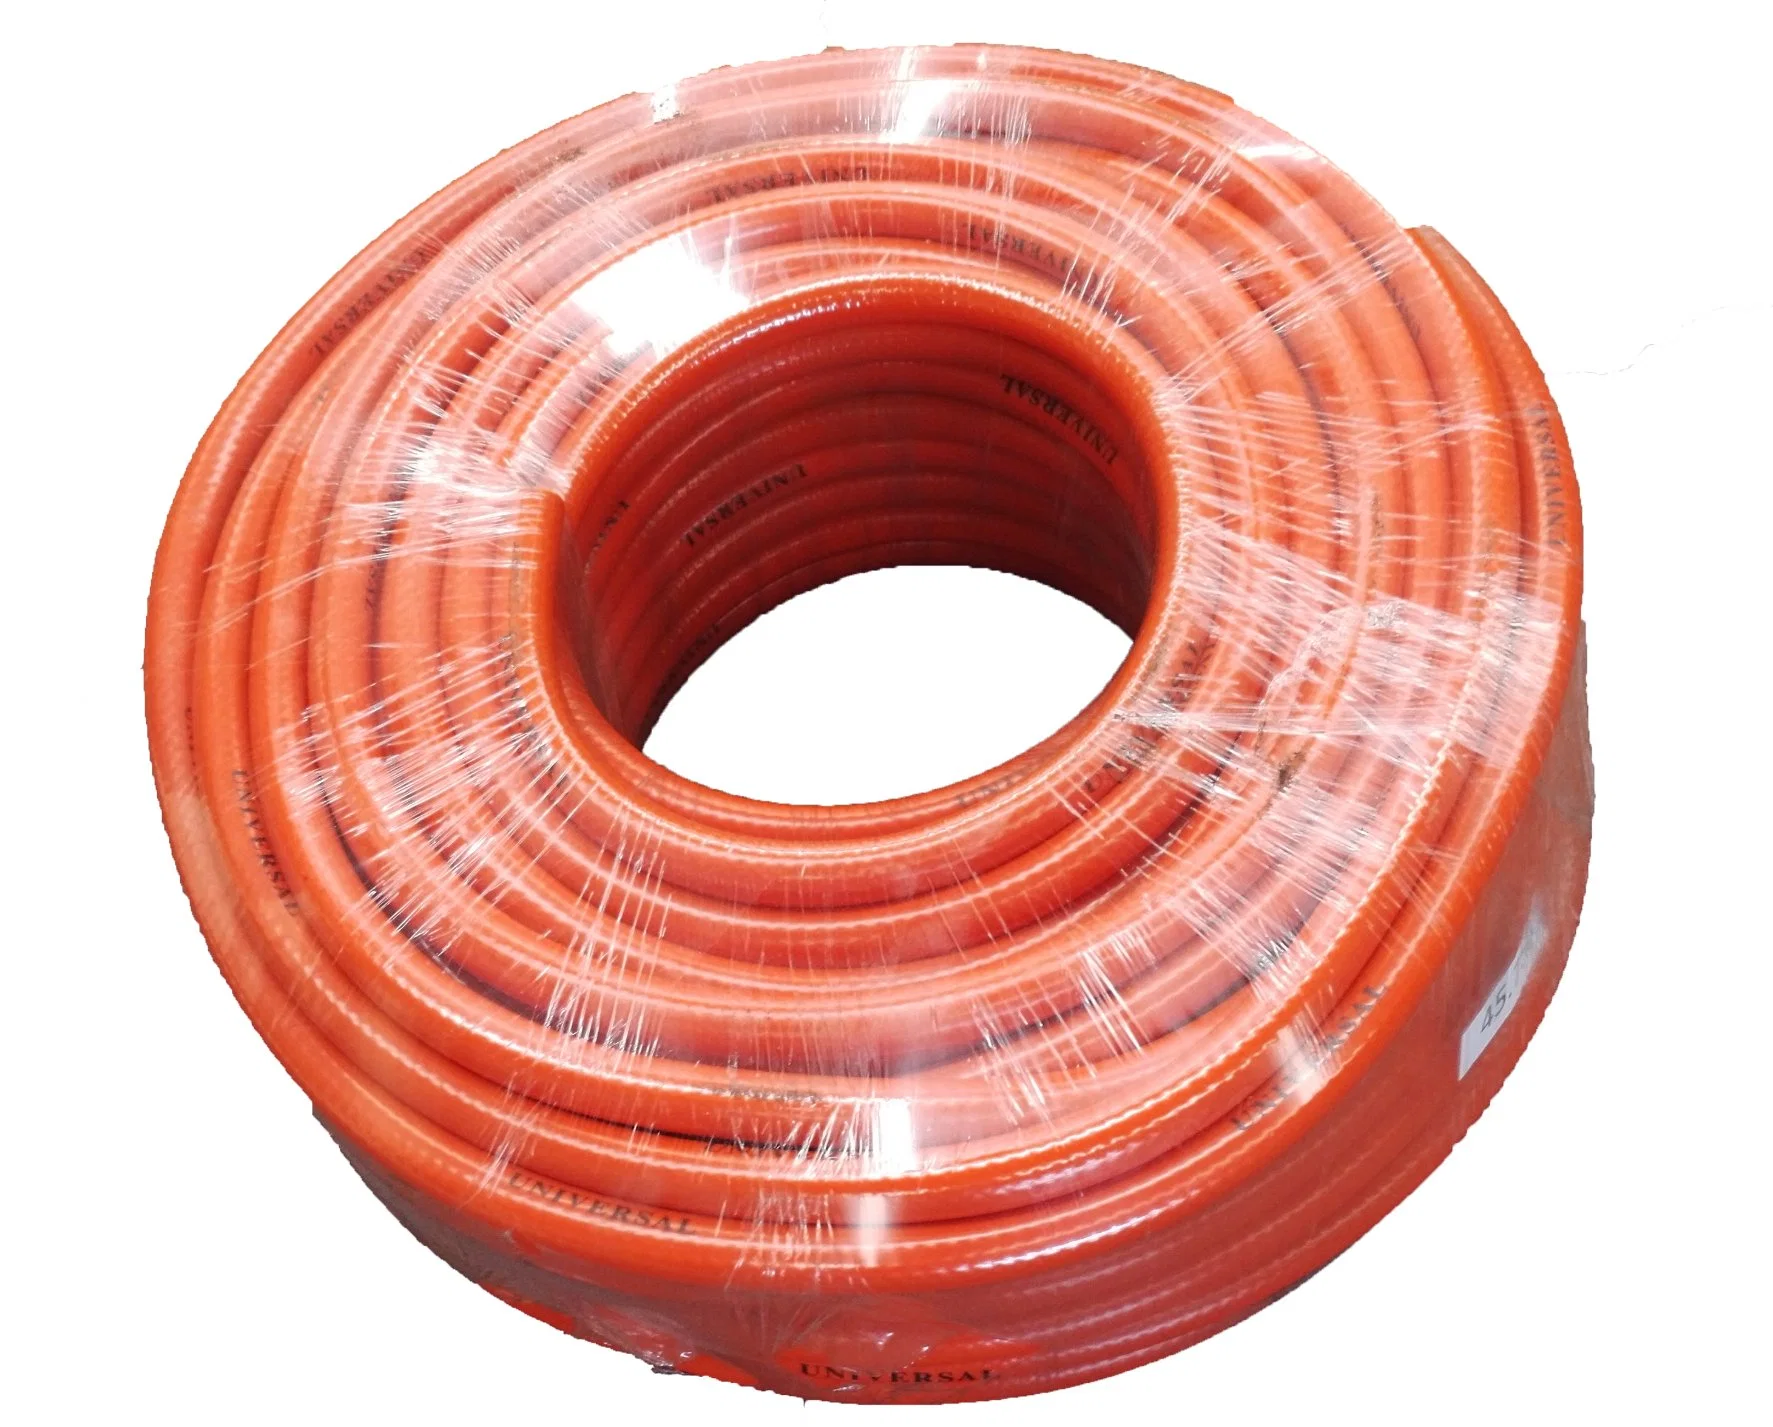 Liquefied Petroleum Gas Hose Used for LPG Cylinder